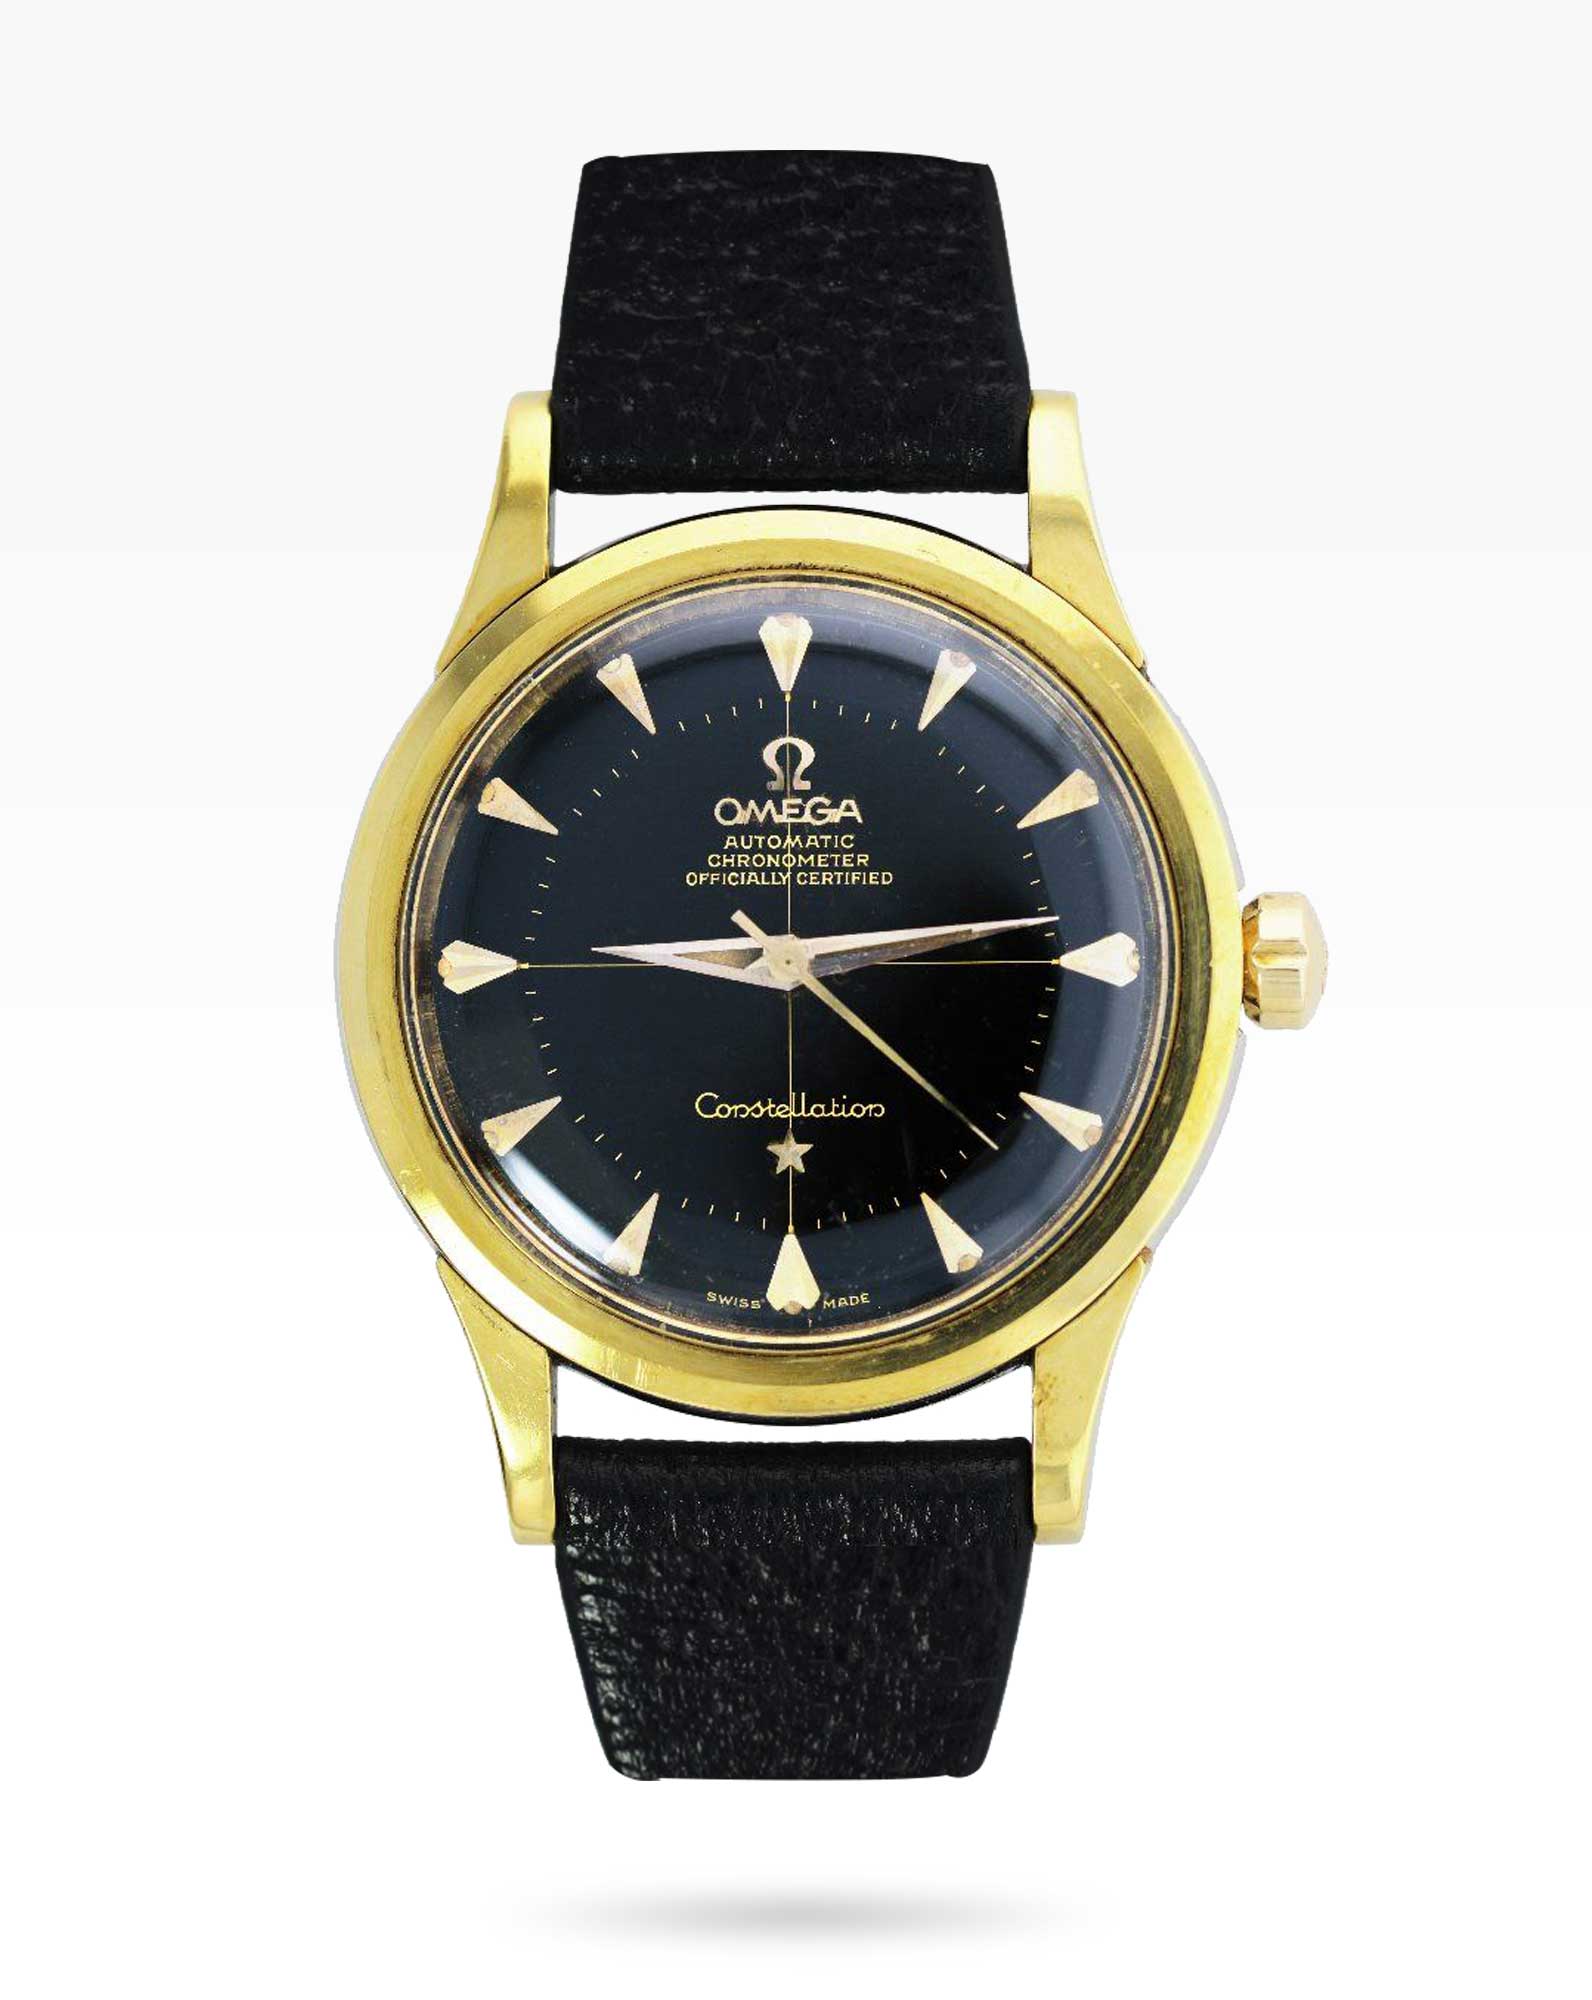 Omega Constellation Ref.2852 Black Pie-pan Dial with 2-Tone Case - 2ToneVintage Singapore